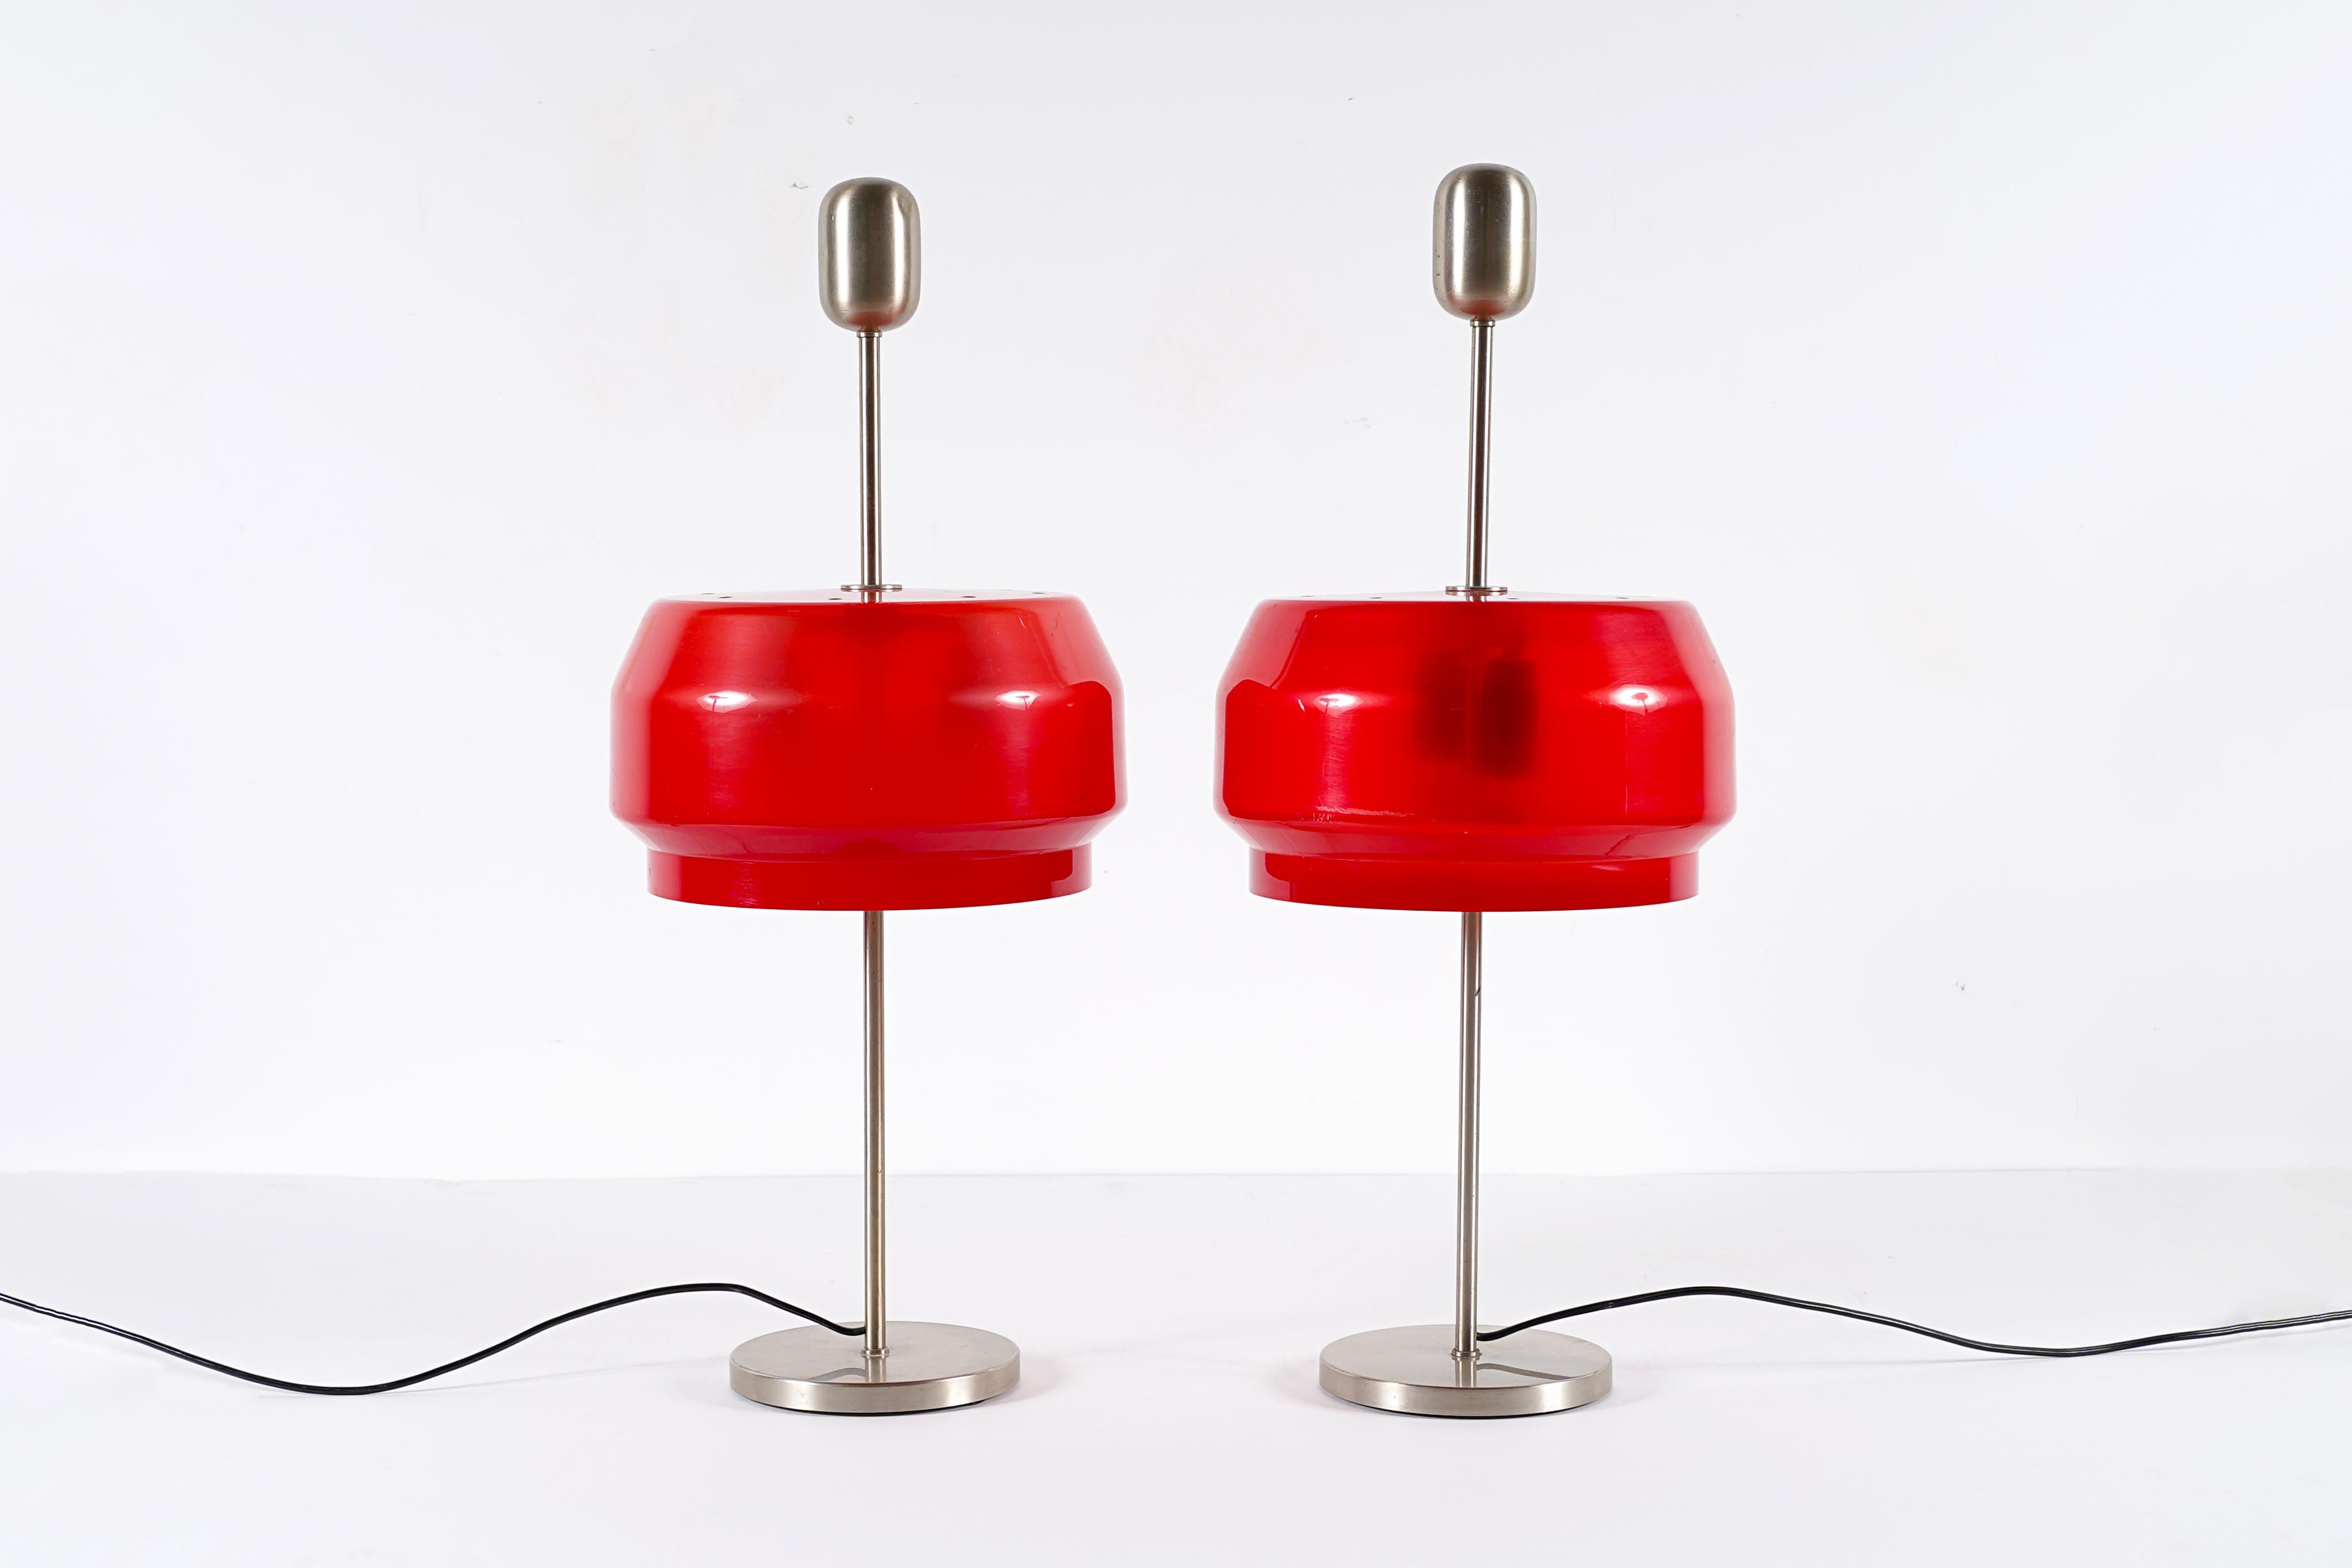 Rare pair of lamps KD 9 model designed by Gianemilio Piero and Anna Monti /  Studio G.P.A. Monti for Kartell, Italy, between 1959 and 1969. Very good vintage condition. This model is no longer produced at present. This is one of the first lamps